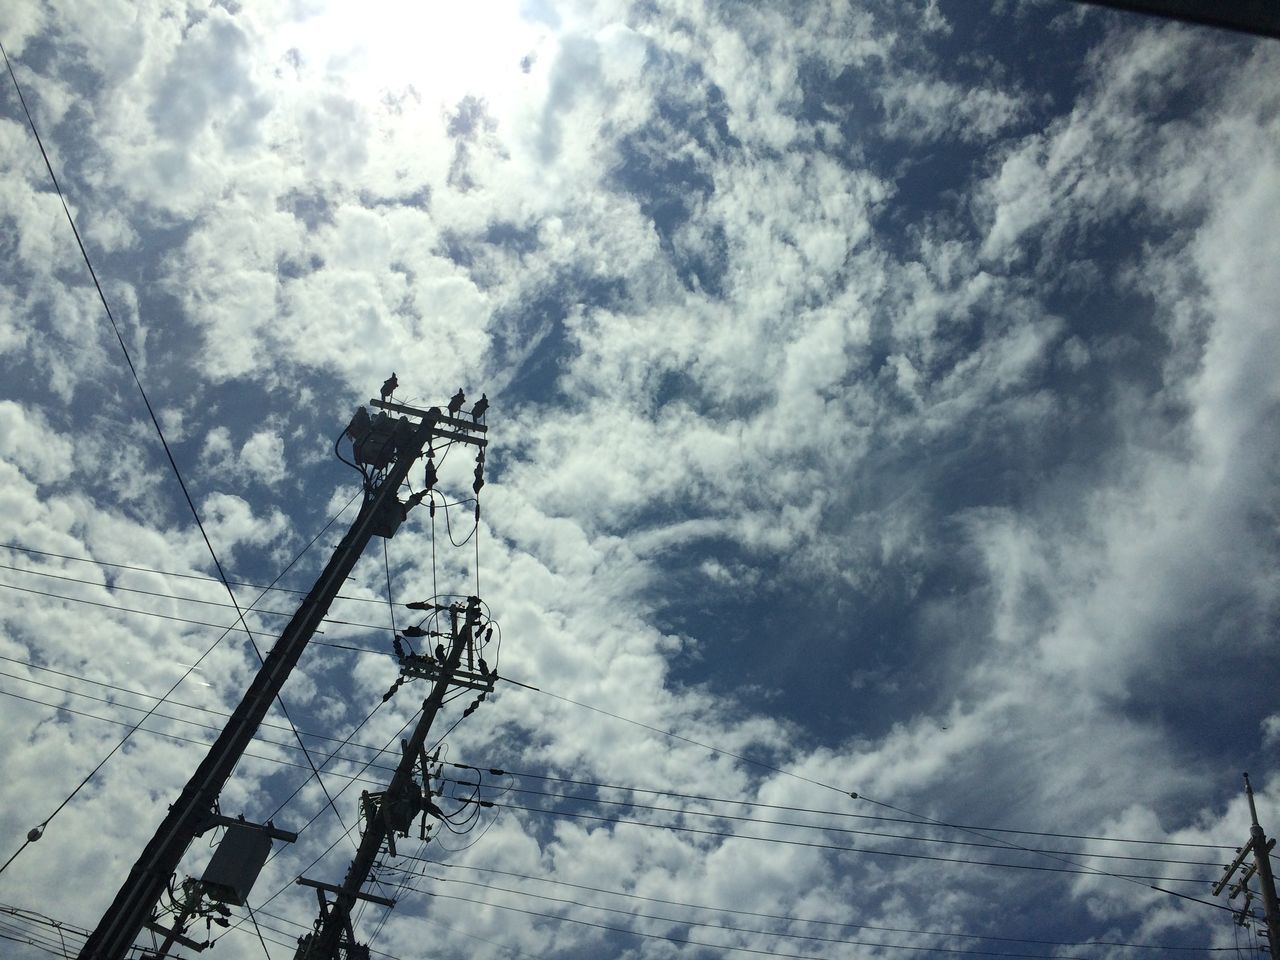 LOW ANGLE VIEW OF ELECTRICITY PYLON AGAINST CLOUDY SKY